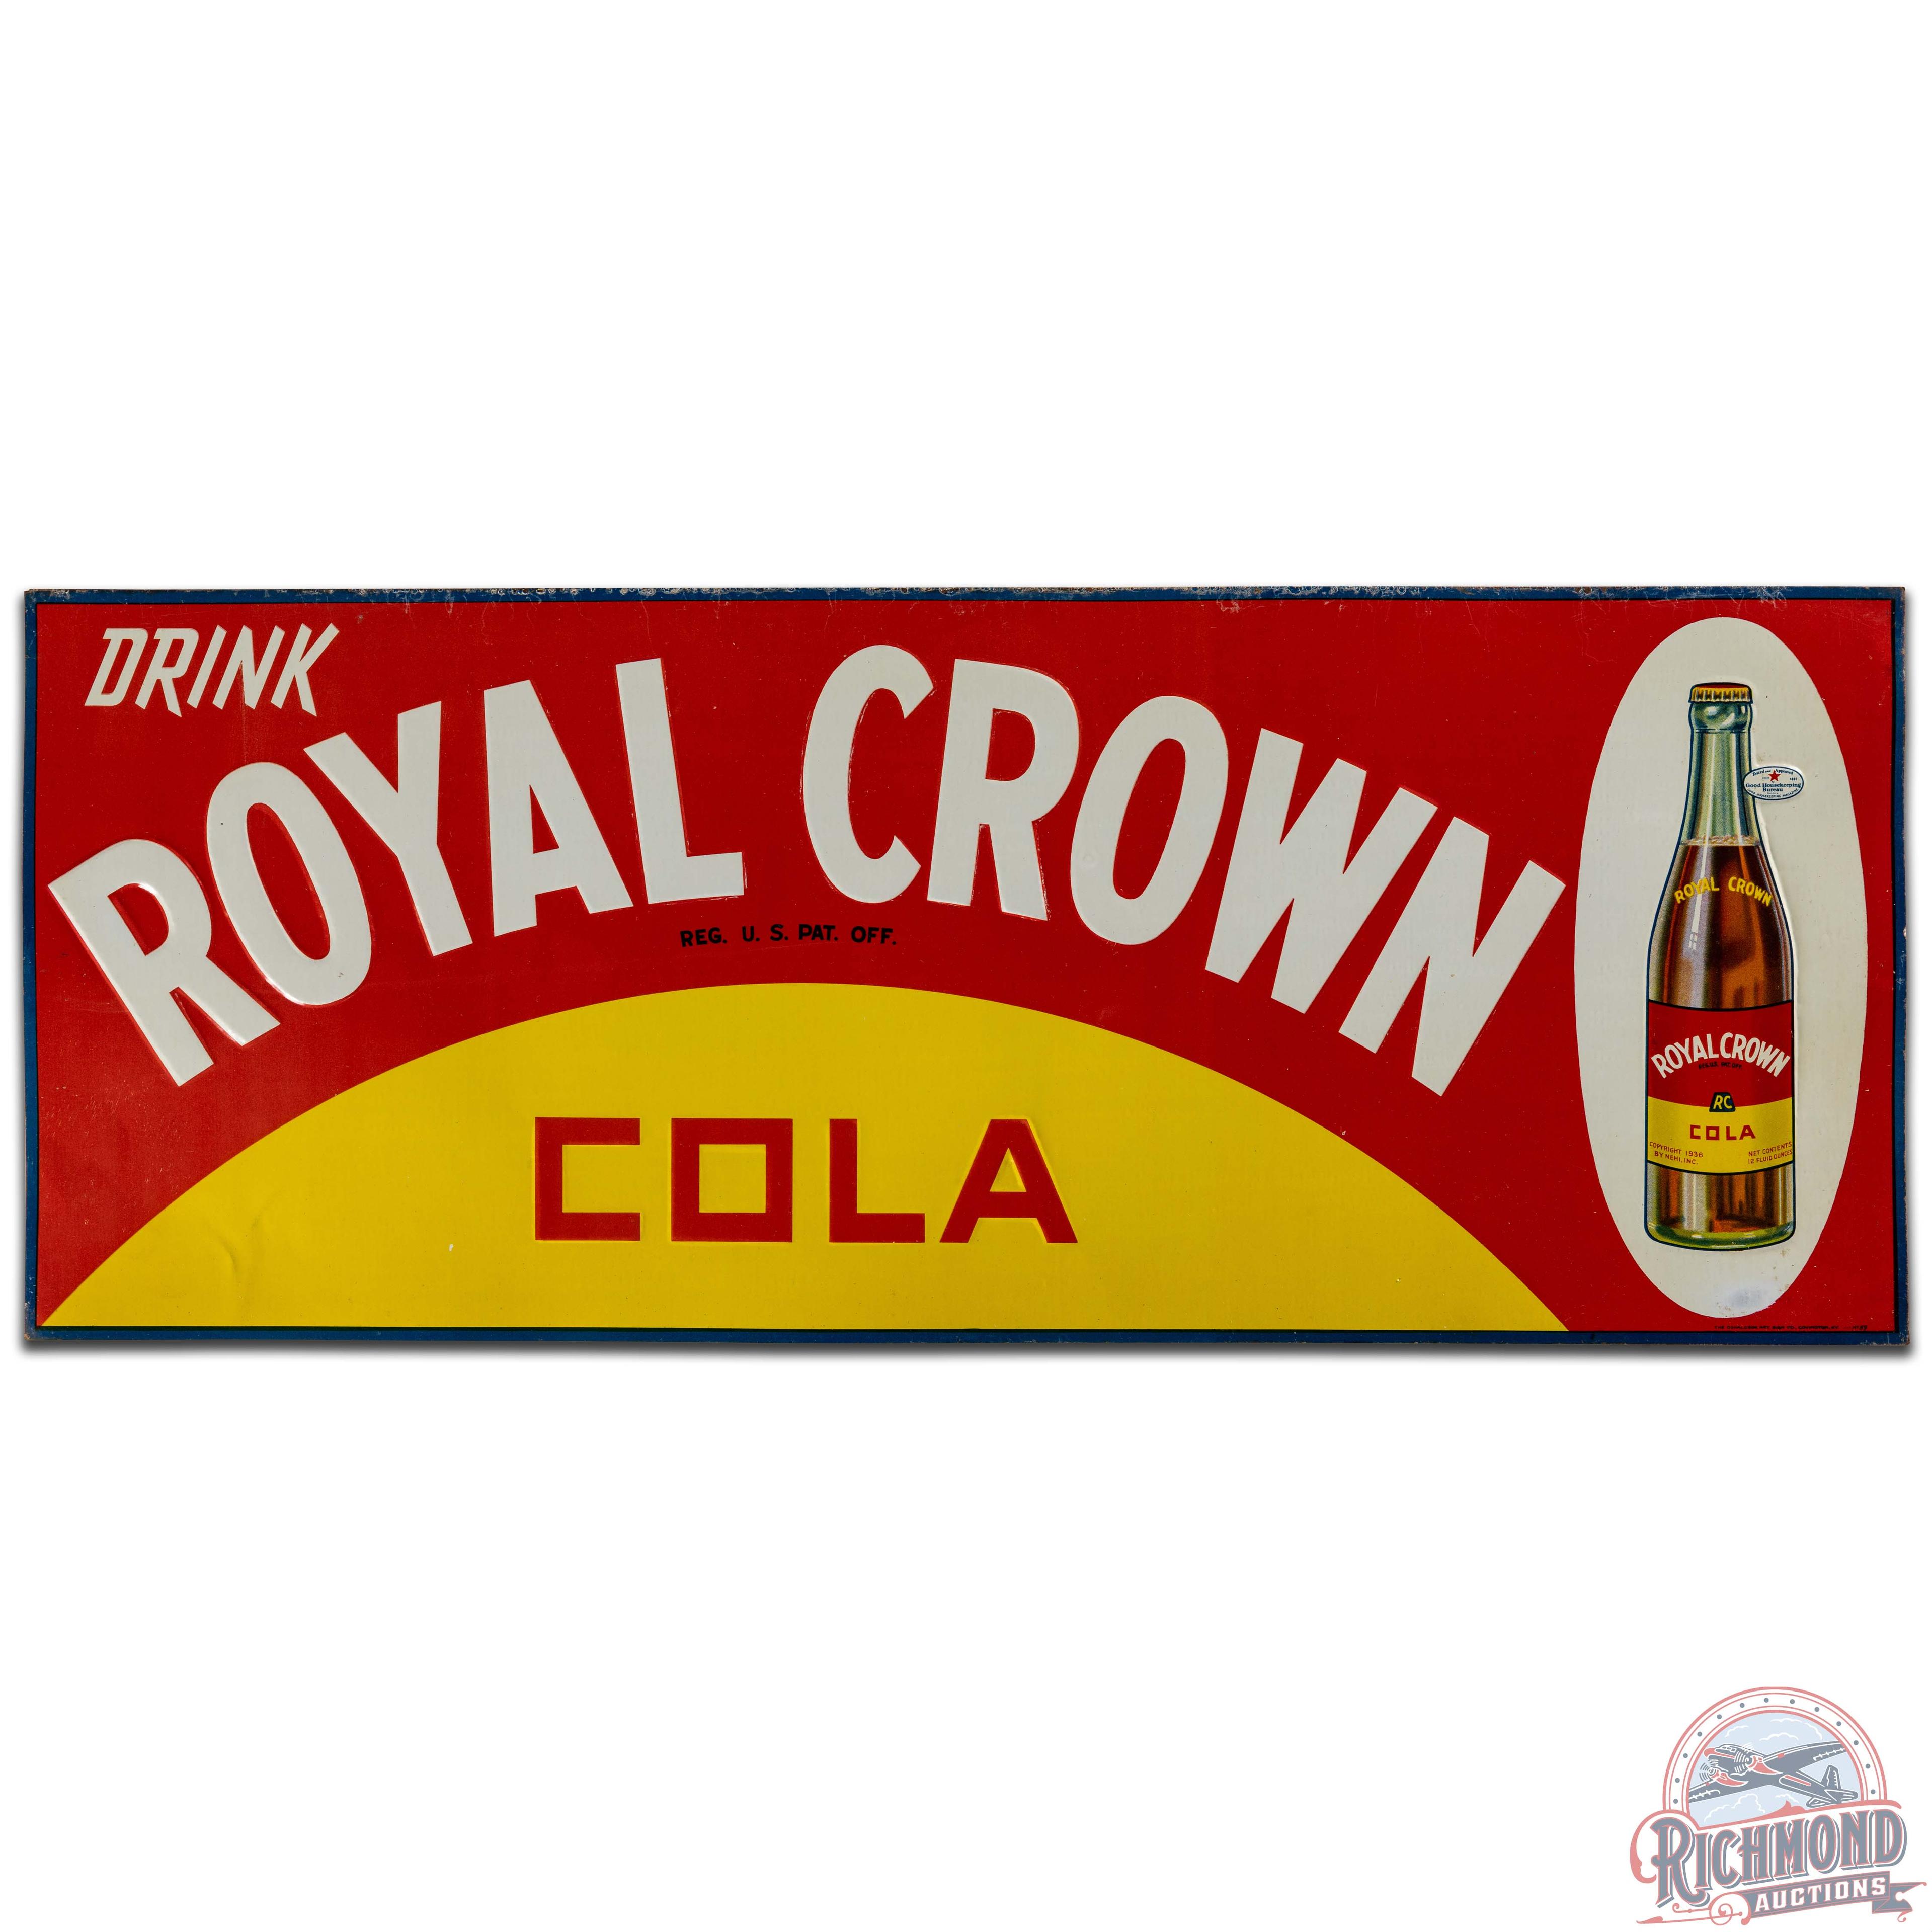 Drink Royal Crown Cola RC Embossed SS Tin Sign w/ Bottle